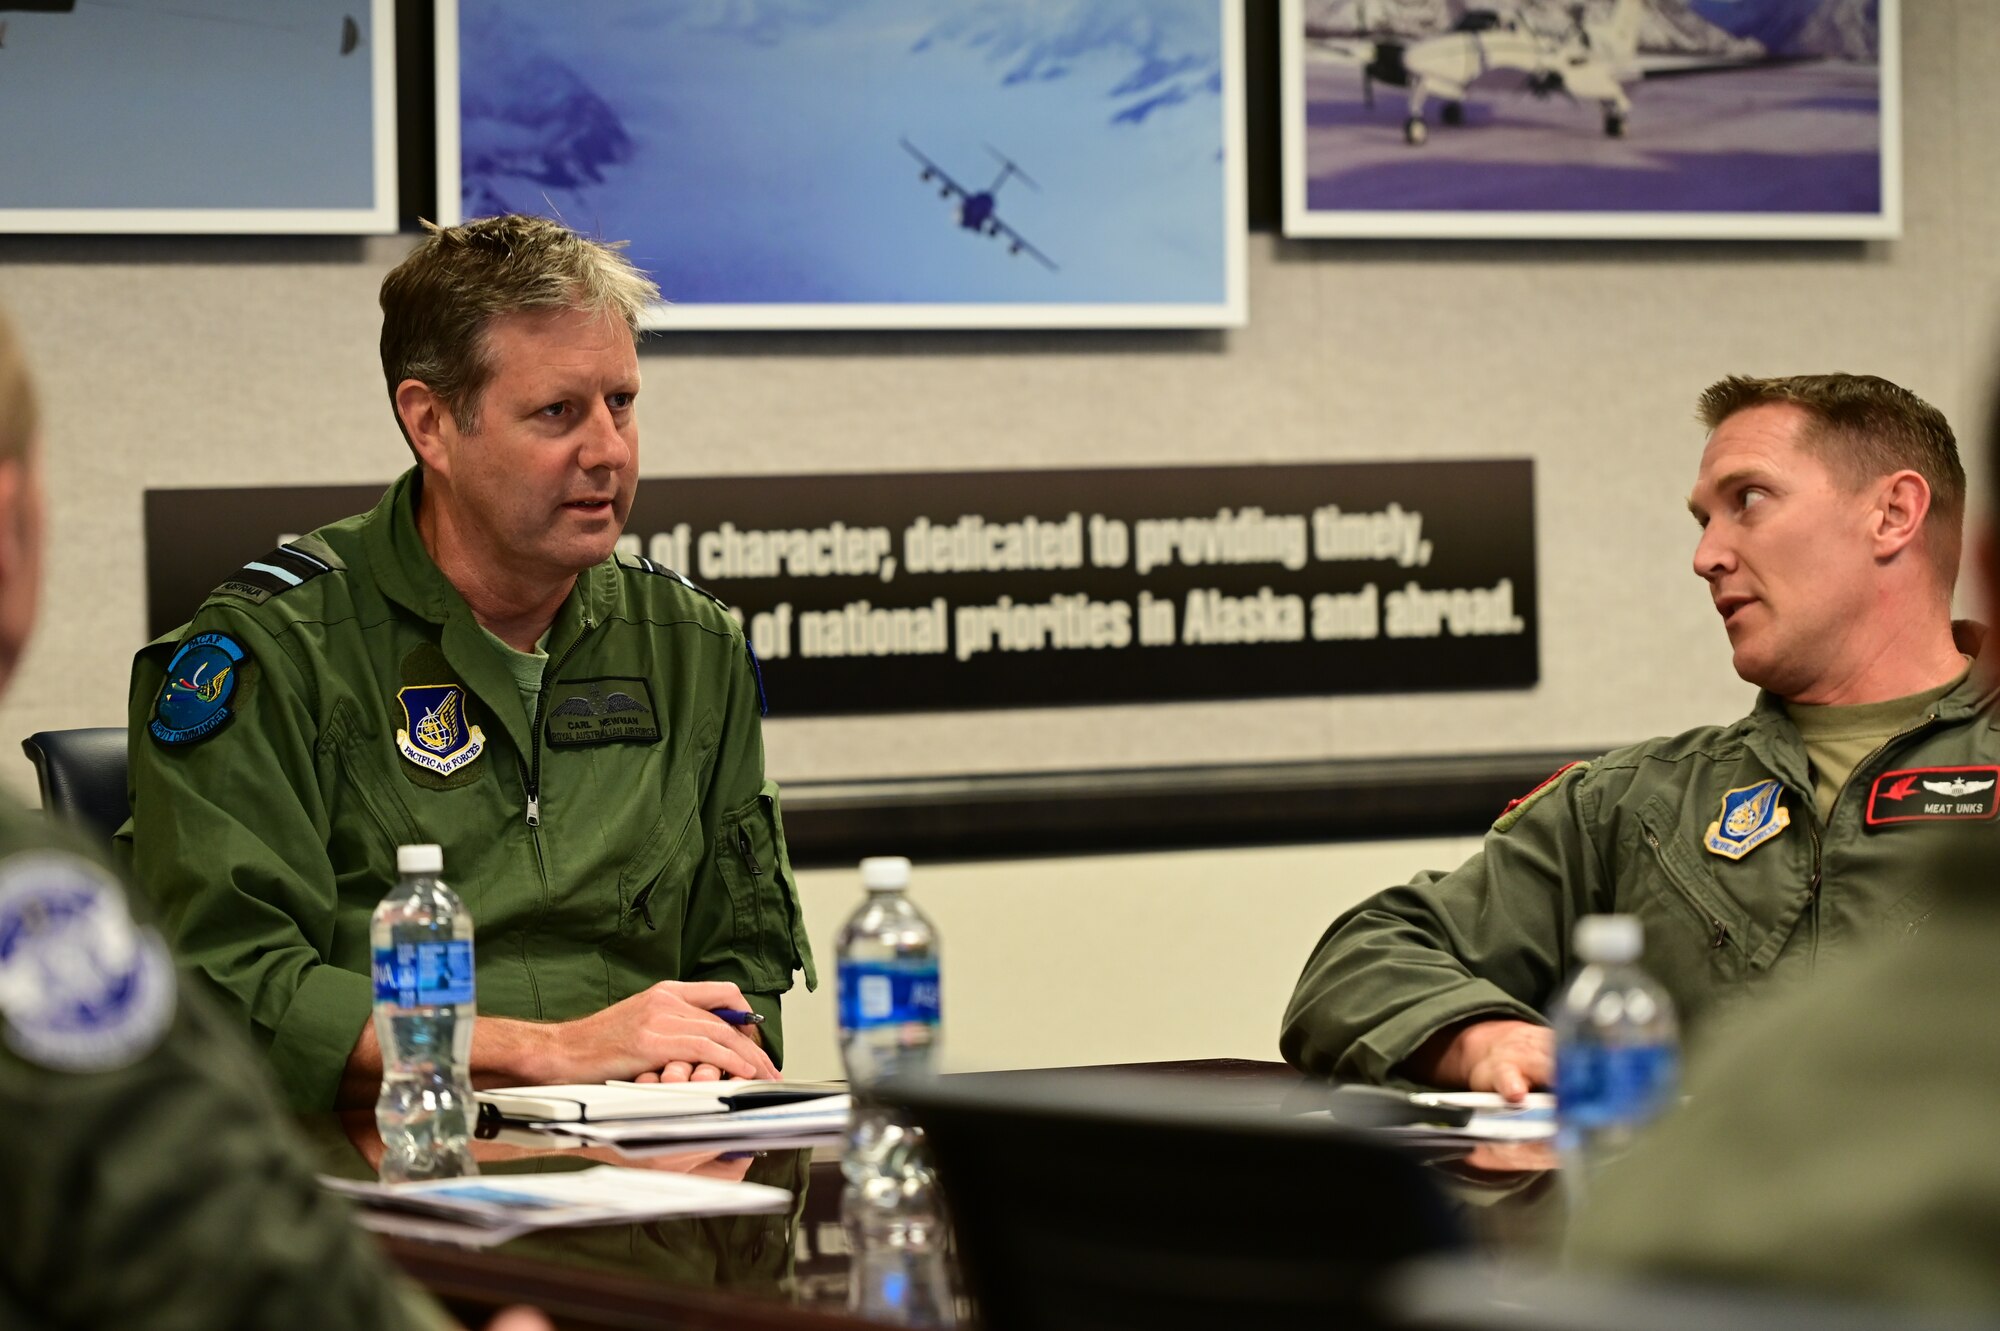 Royal Australian Air Force Air Vice-Marshal Carl Newman, Pacific Air Forces deputy commander, is briefed by Lt. Col. Kevin Unks, 517th Airlift Squadron director of operations, at Joint Base Elmendorf-Richardson, Alaska, March 28, 2023. Newman met with the 517th and the 144th AS command teams. Newman serving as the Pacific Air Forces deputy commander demonstrates a steadfast commitment between the U.S. and Australia. (U.S. Air Force photo by Airman 1st Class Quatasia Carter)